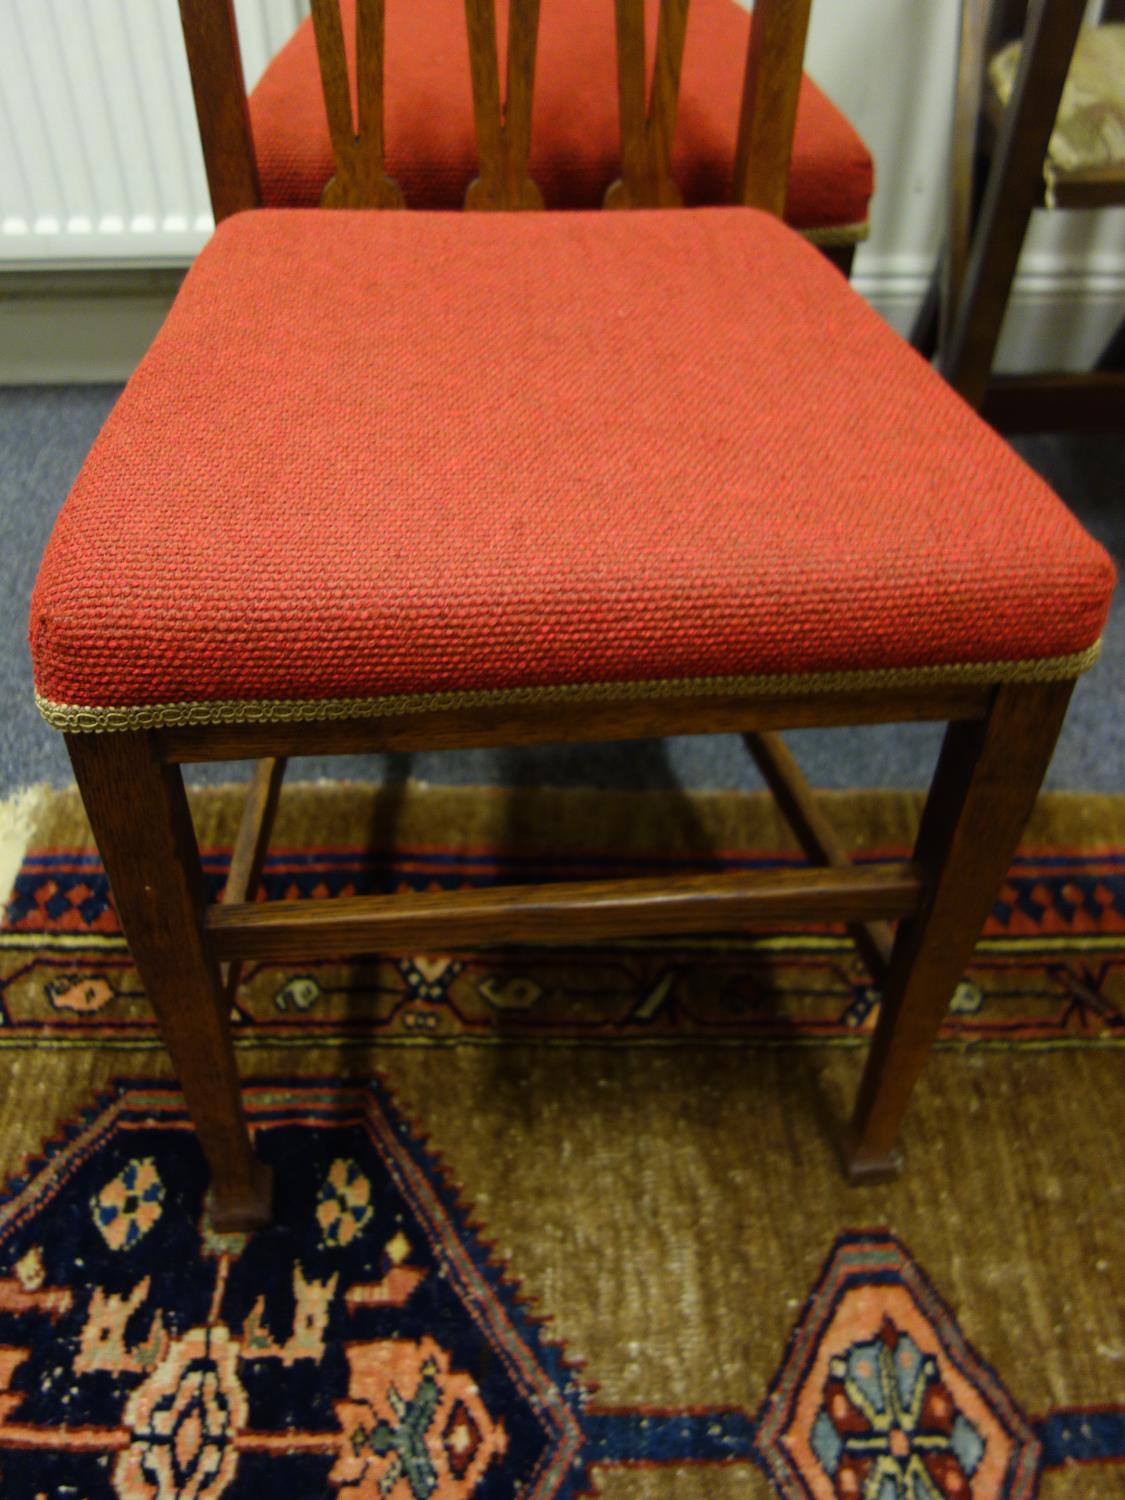 Pair of oak Art Nouveau chairs with inlaid decoration to the back, burgundy upholstered - Image 3 of 3